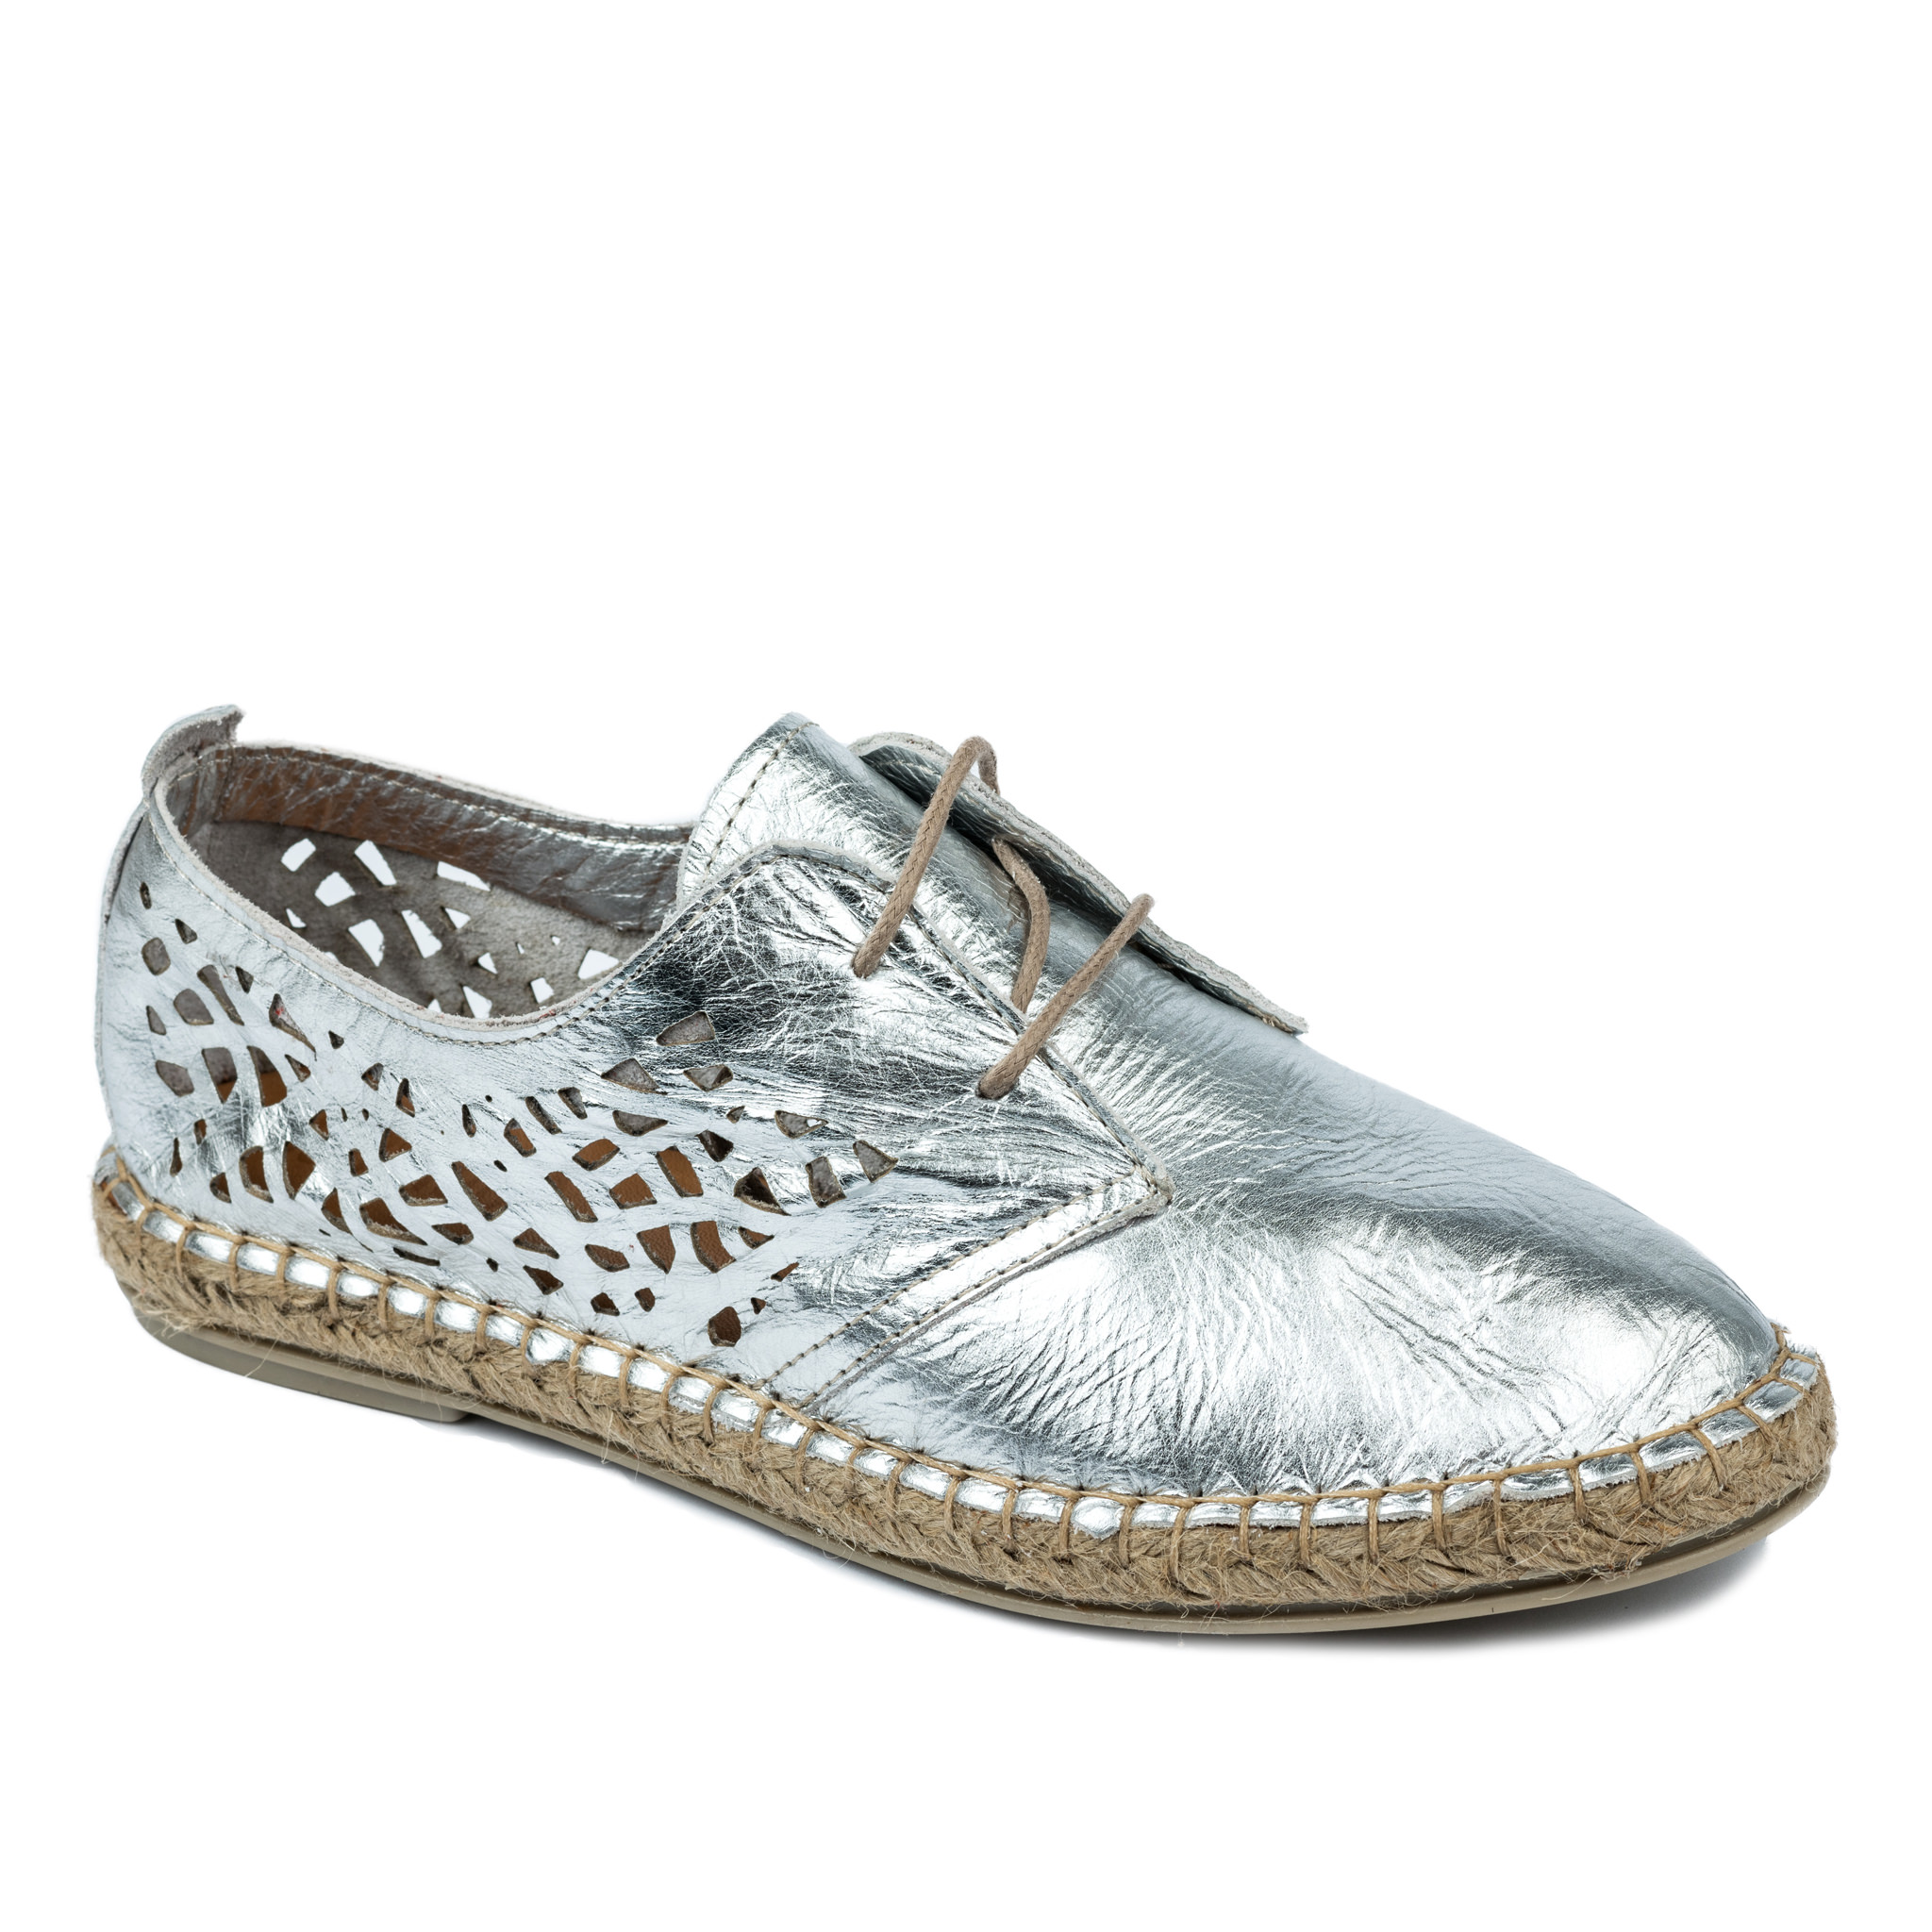 Leather espadrilles A573 - SILVER